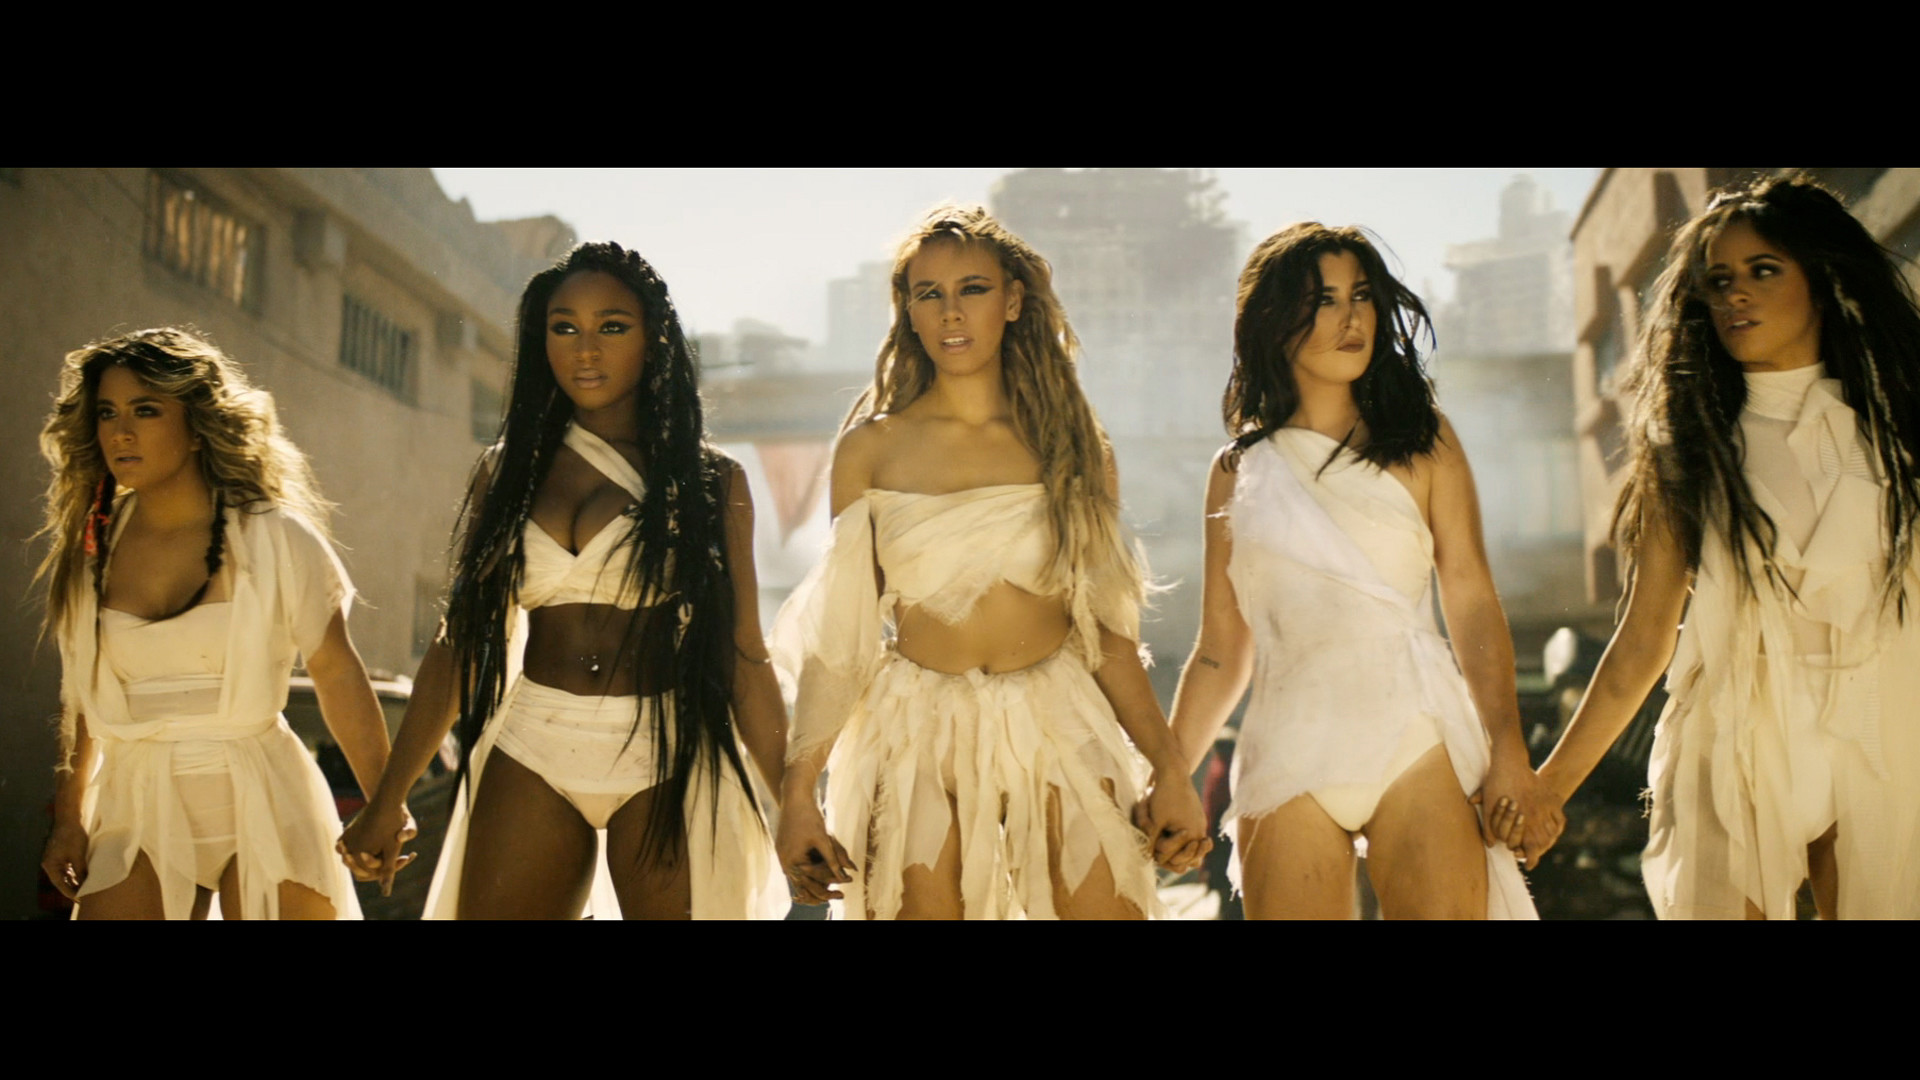 1920x1080 “That's My Girl” Music Video Now On Vevo